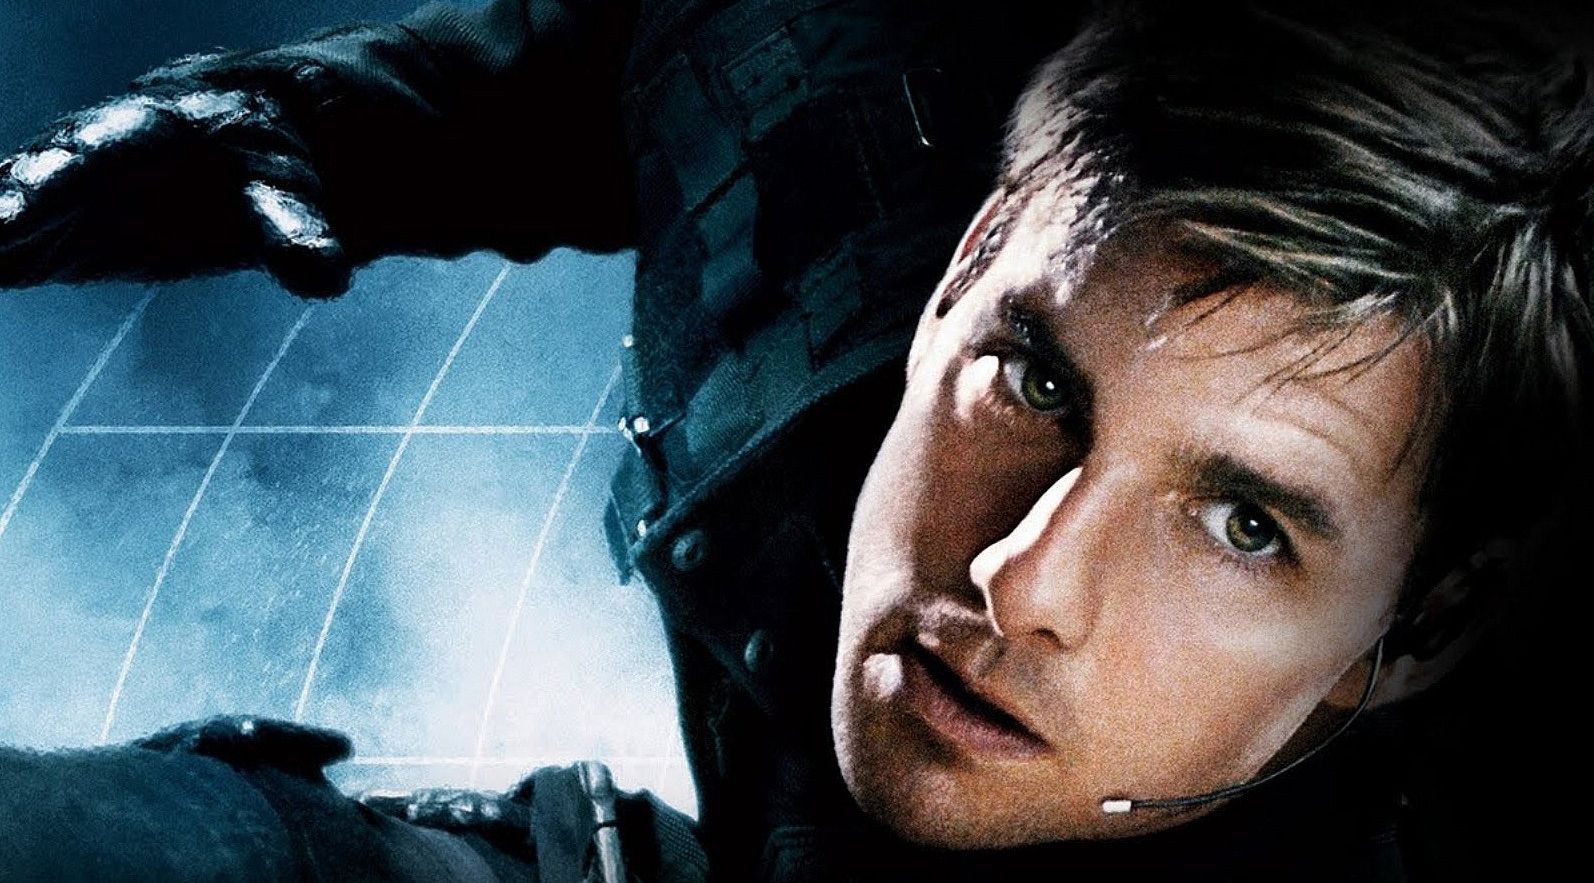 'Mission: Impossible 5' announces more cast and looks to target Chinese market